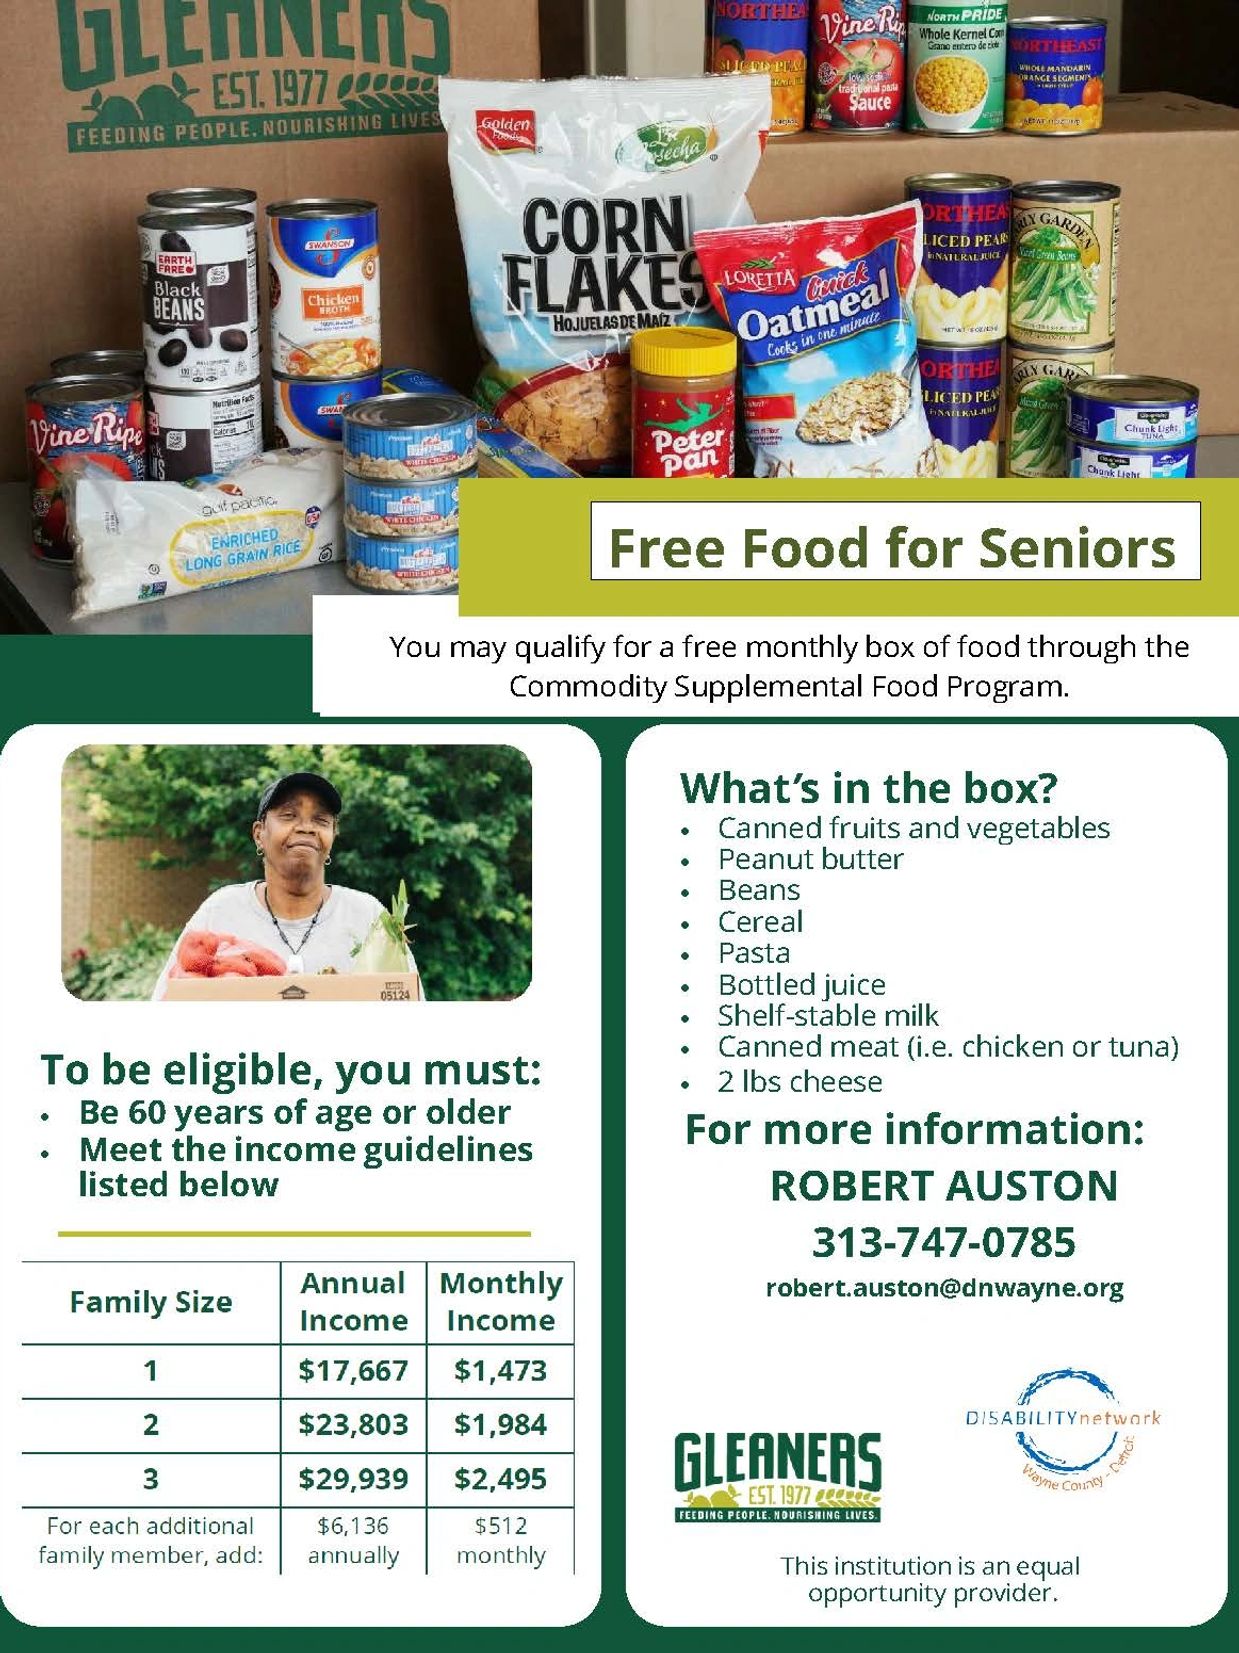 SIGN UP TO RECEIVE A FOOD BOX EACH MONTH!